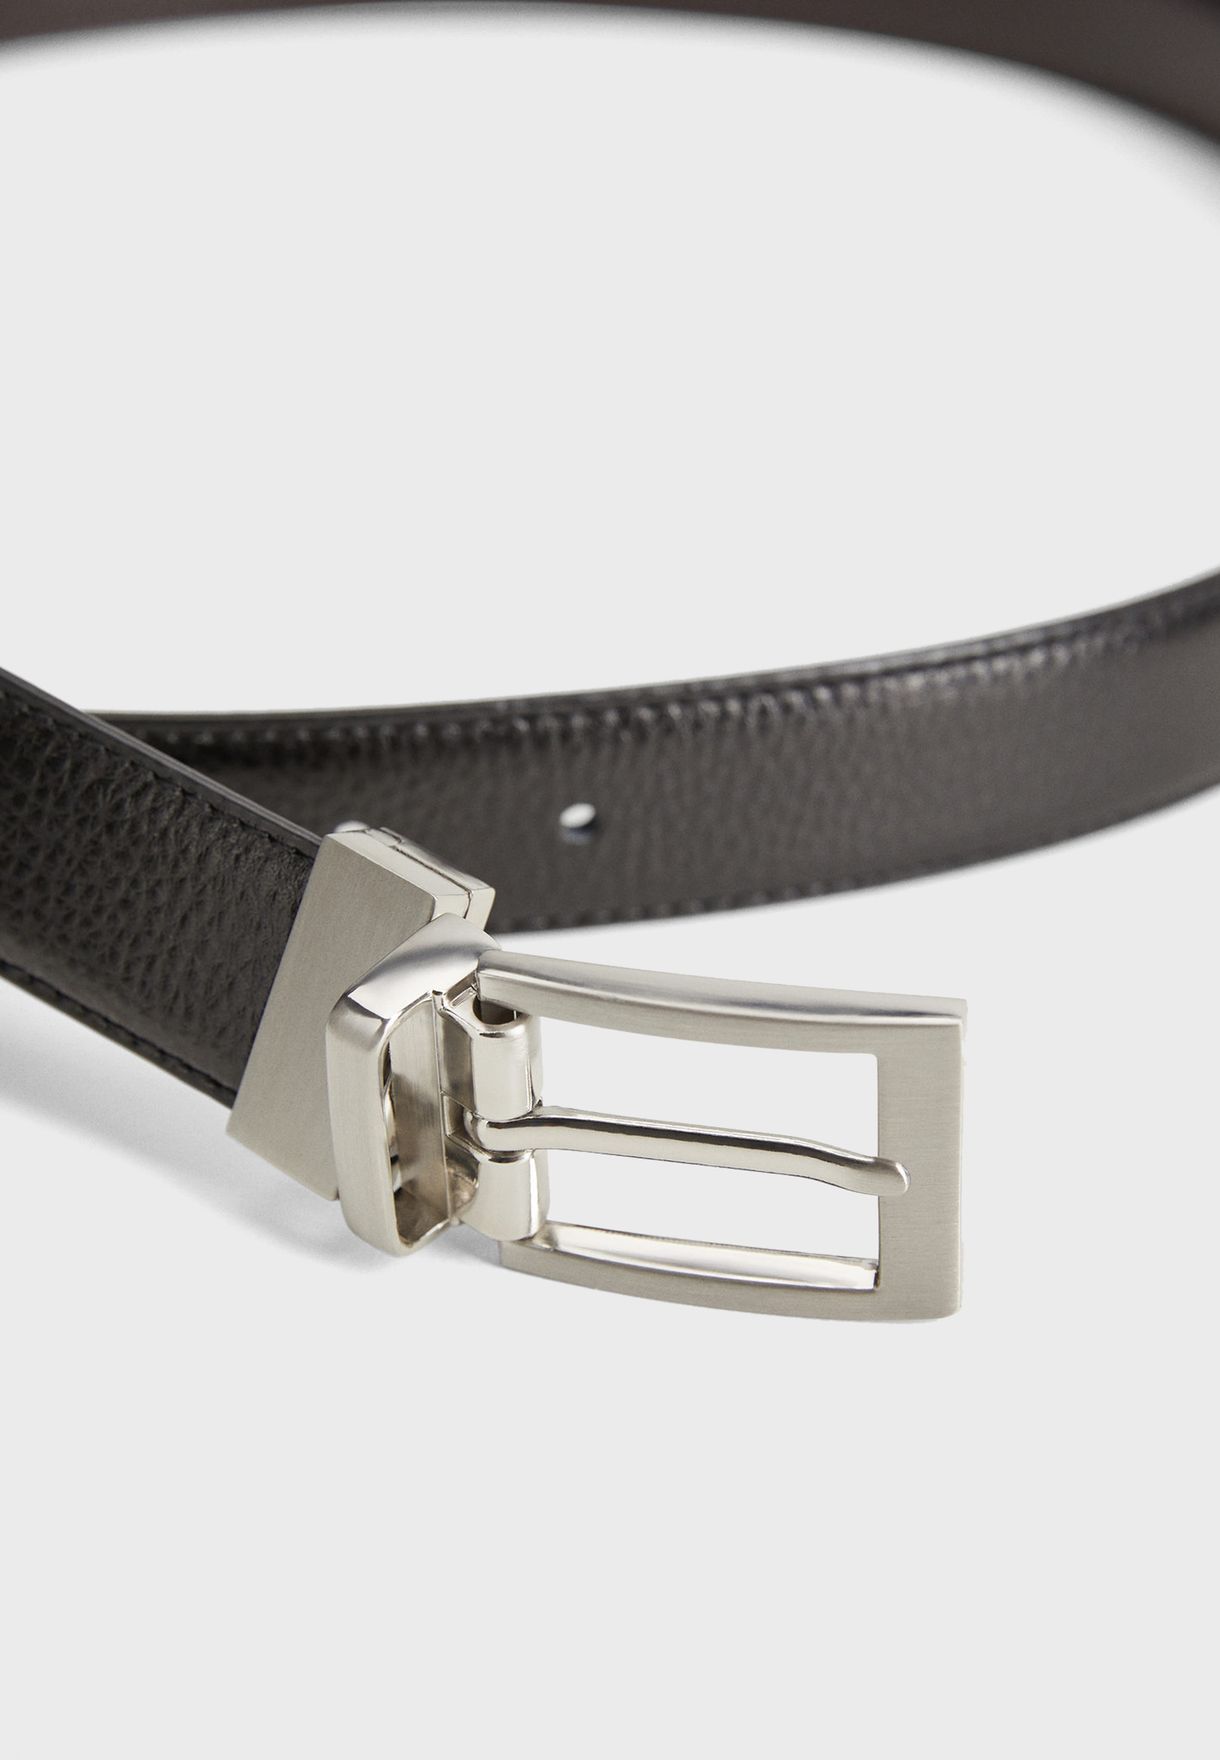 Casual None Allocated Hole Belt